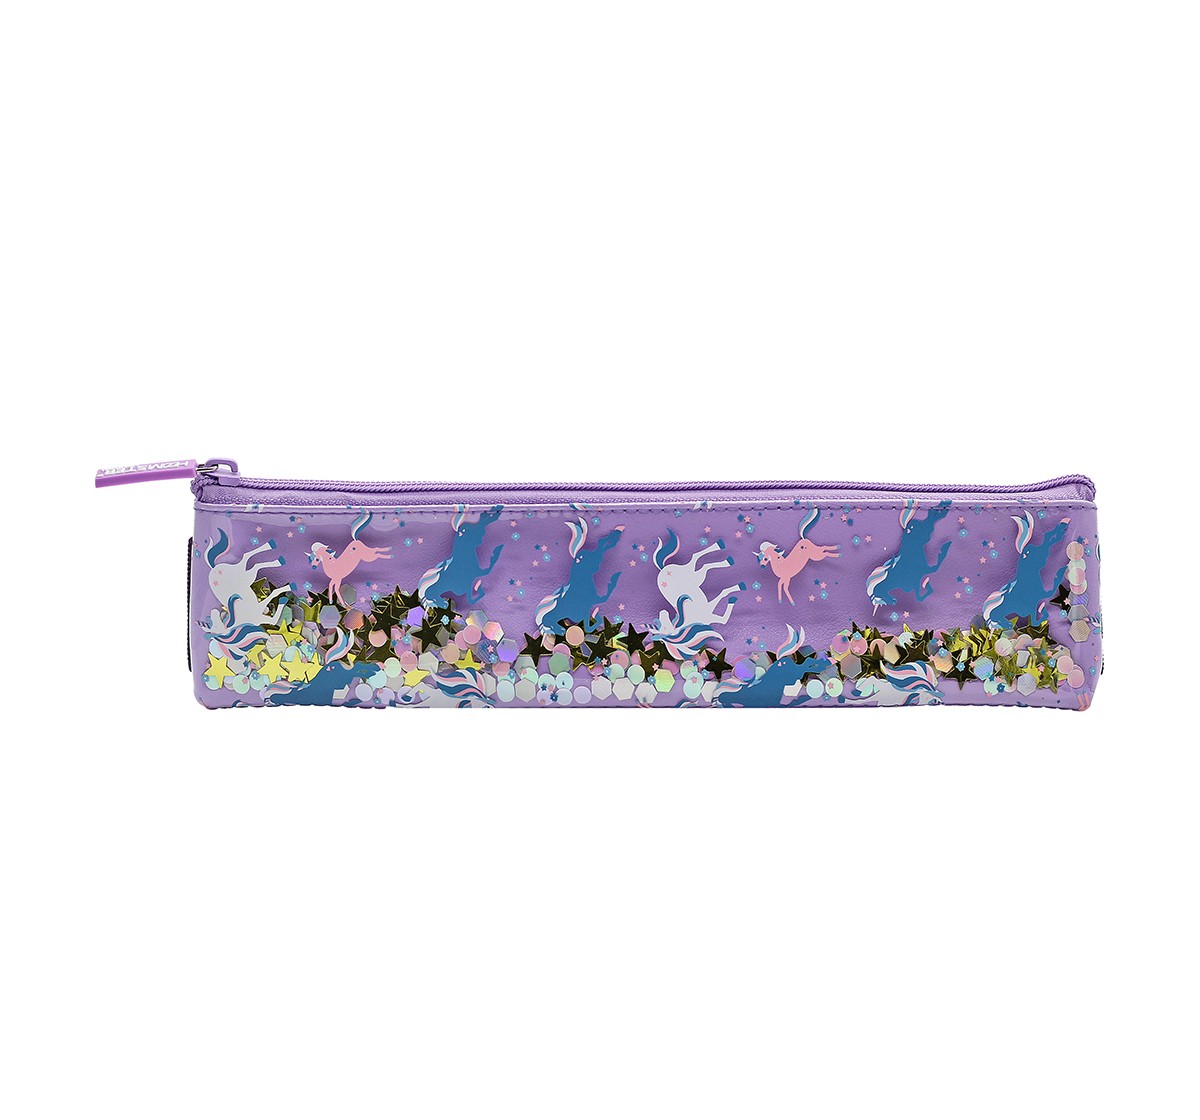 Hamster London Unicorn Pencil Pouch with Book Band for Kids age 3Y+ (Purple)